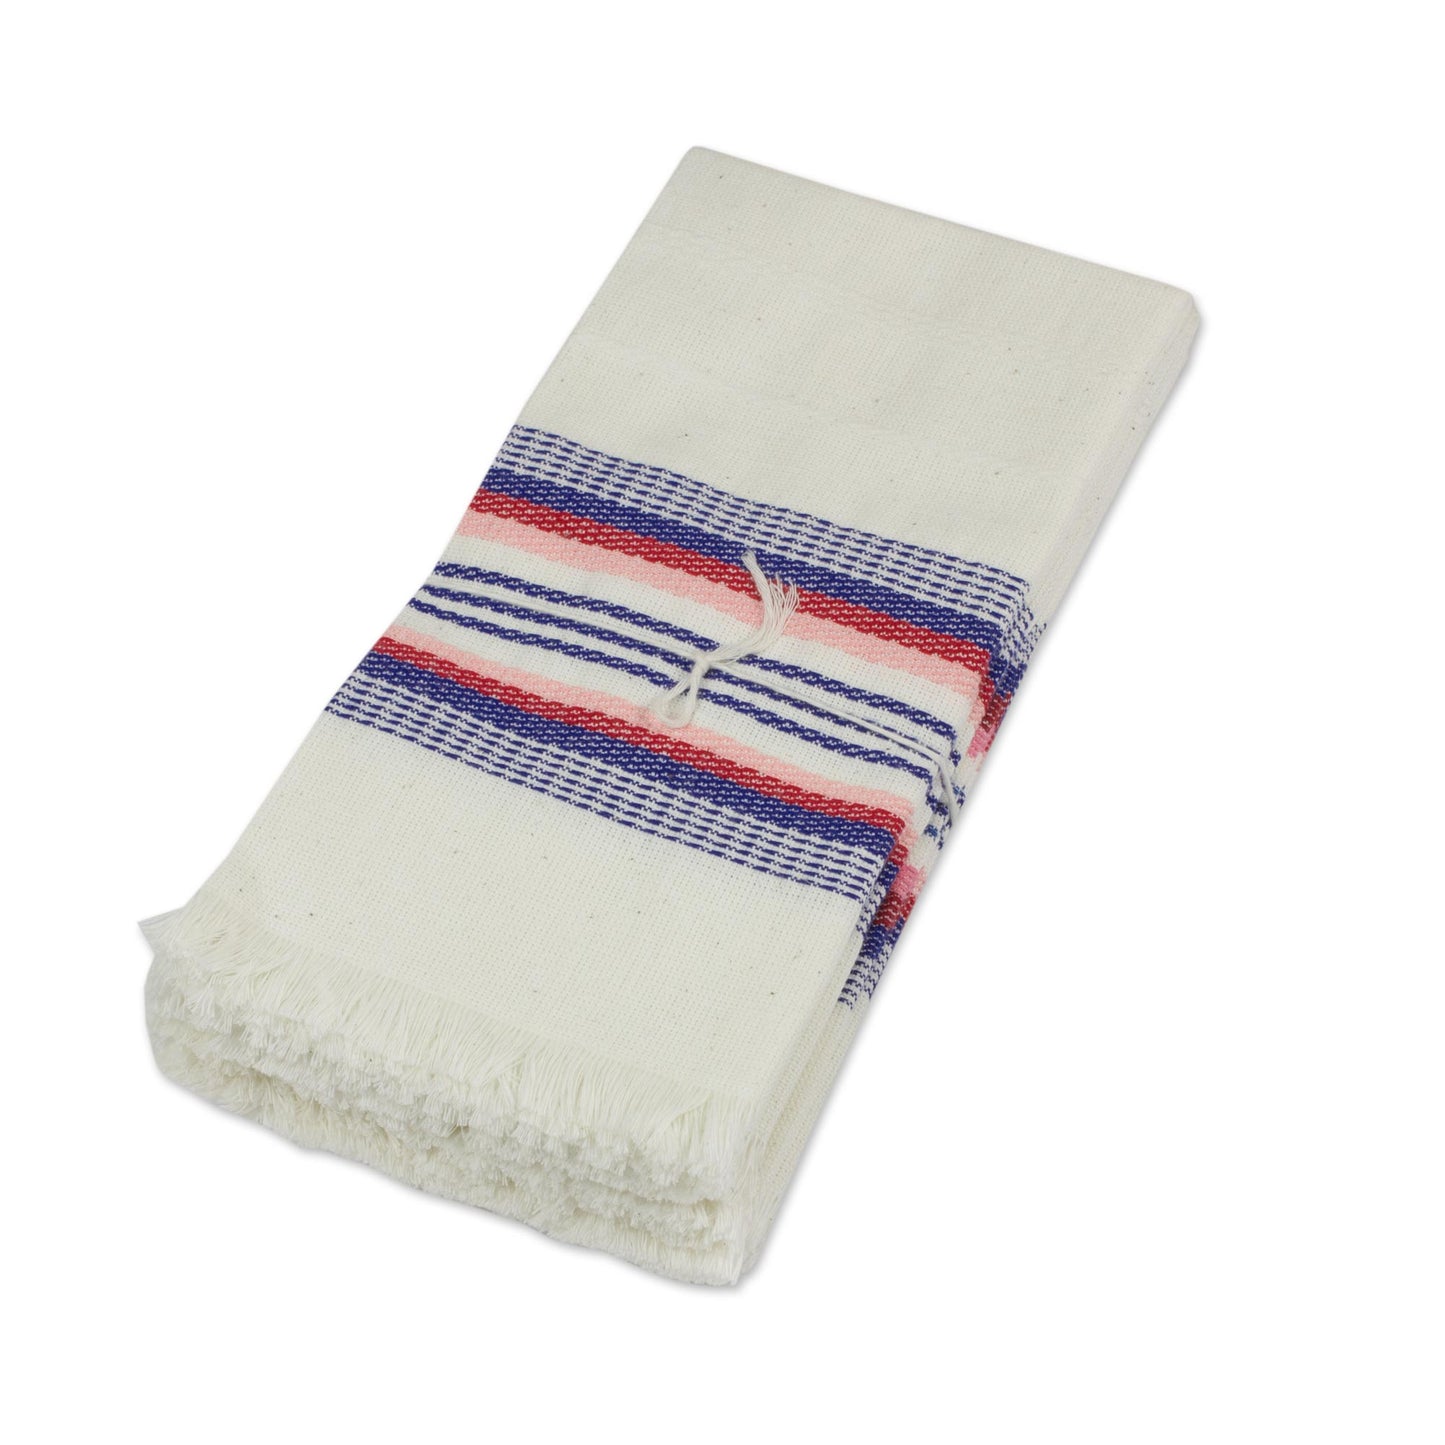 Dinner Guest Striped 100% Cotton Napkins from Guatemala (Set of 6)